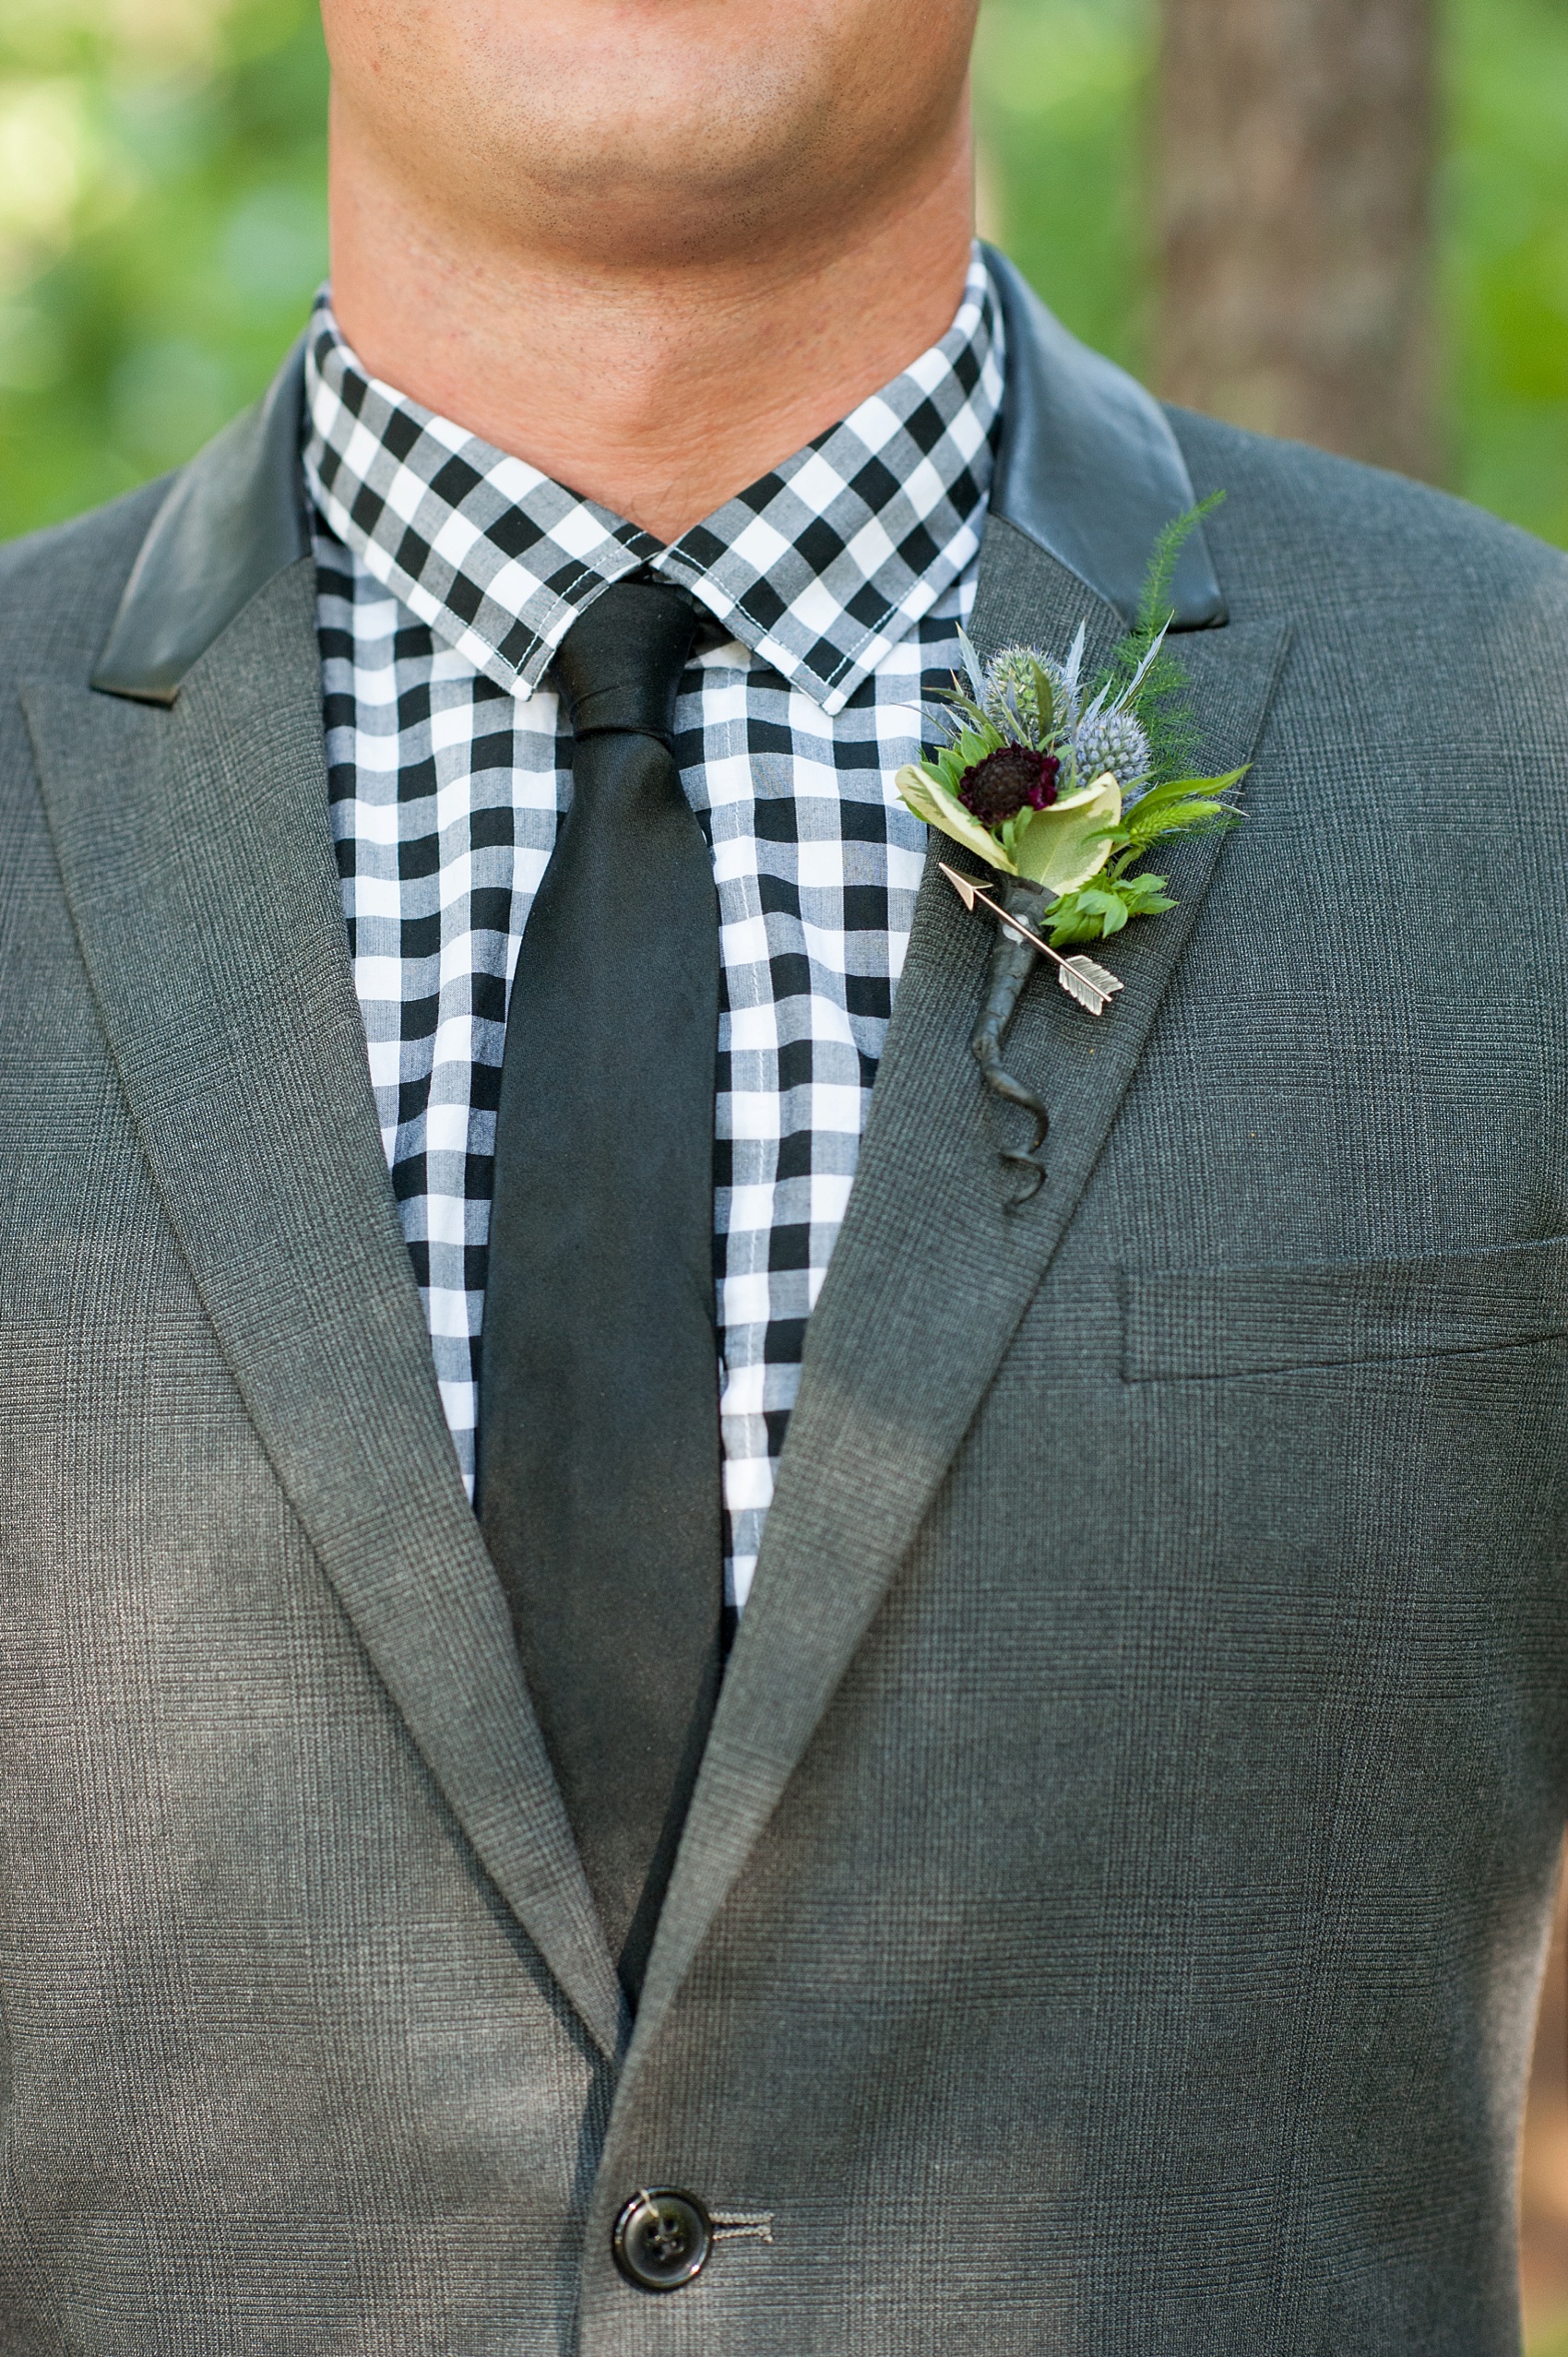 Raleigh, NC wedding inspiration by Mikkel Paige Photography. Rustic modern boutonniere and plaid shirt on the groom at Umstead Park. 